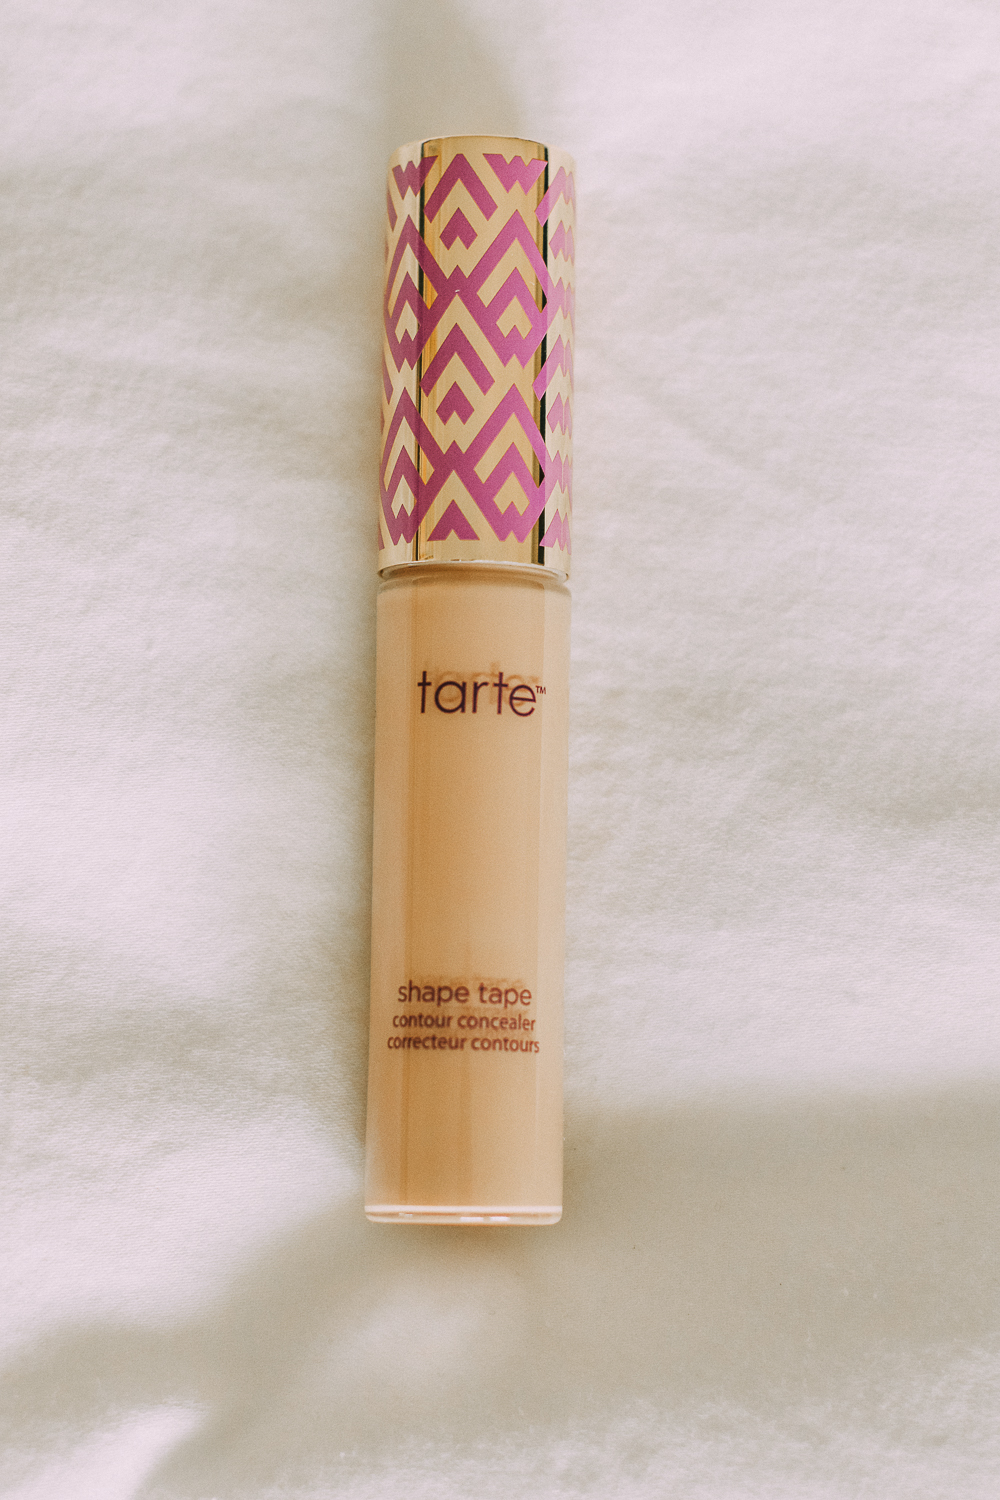 Tarte concealer in the Feel Nice Box from QVC